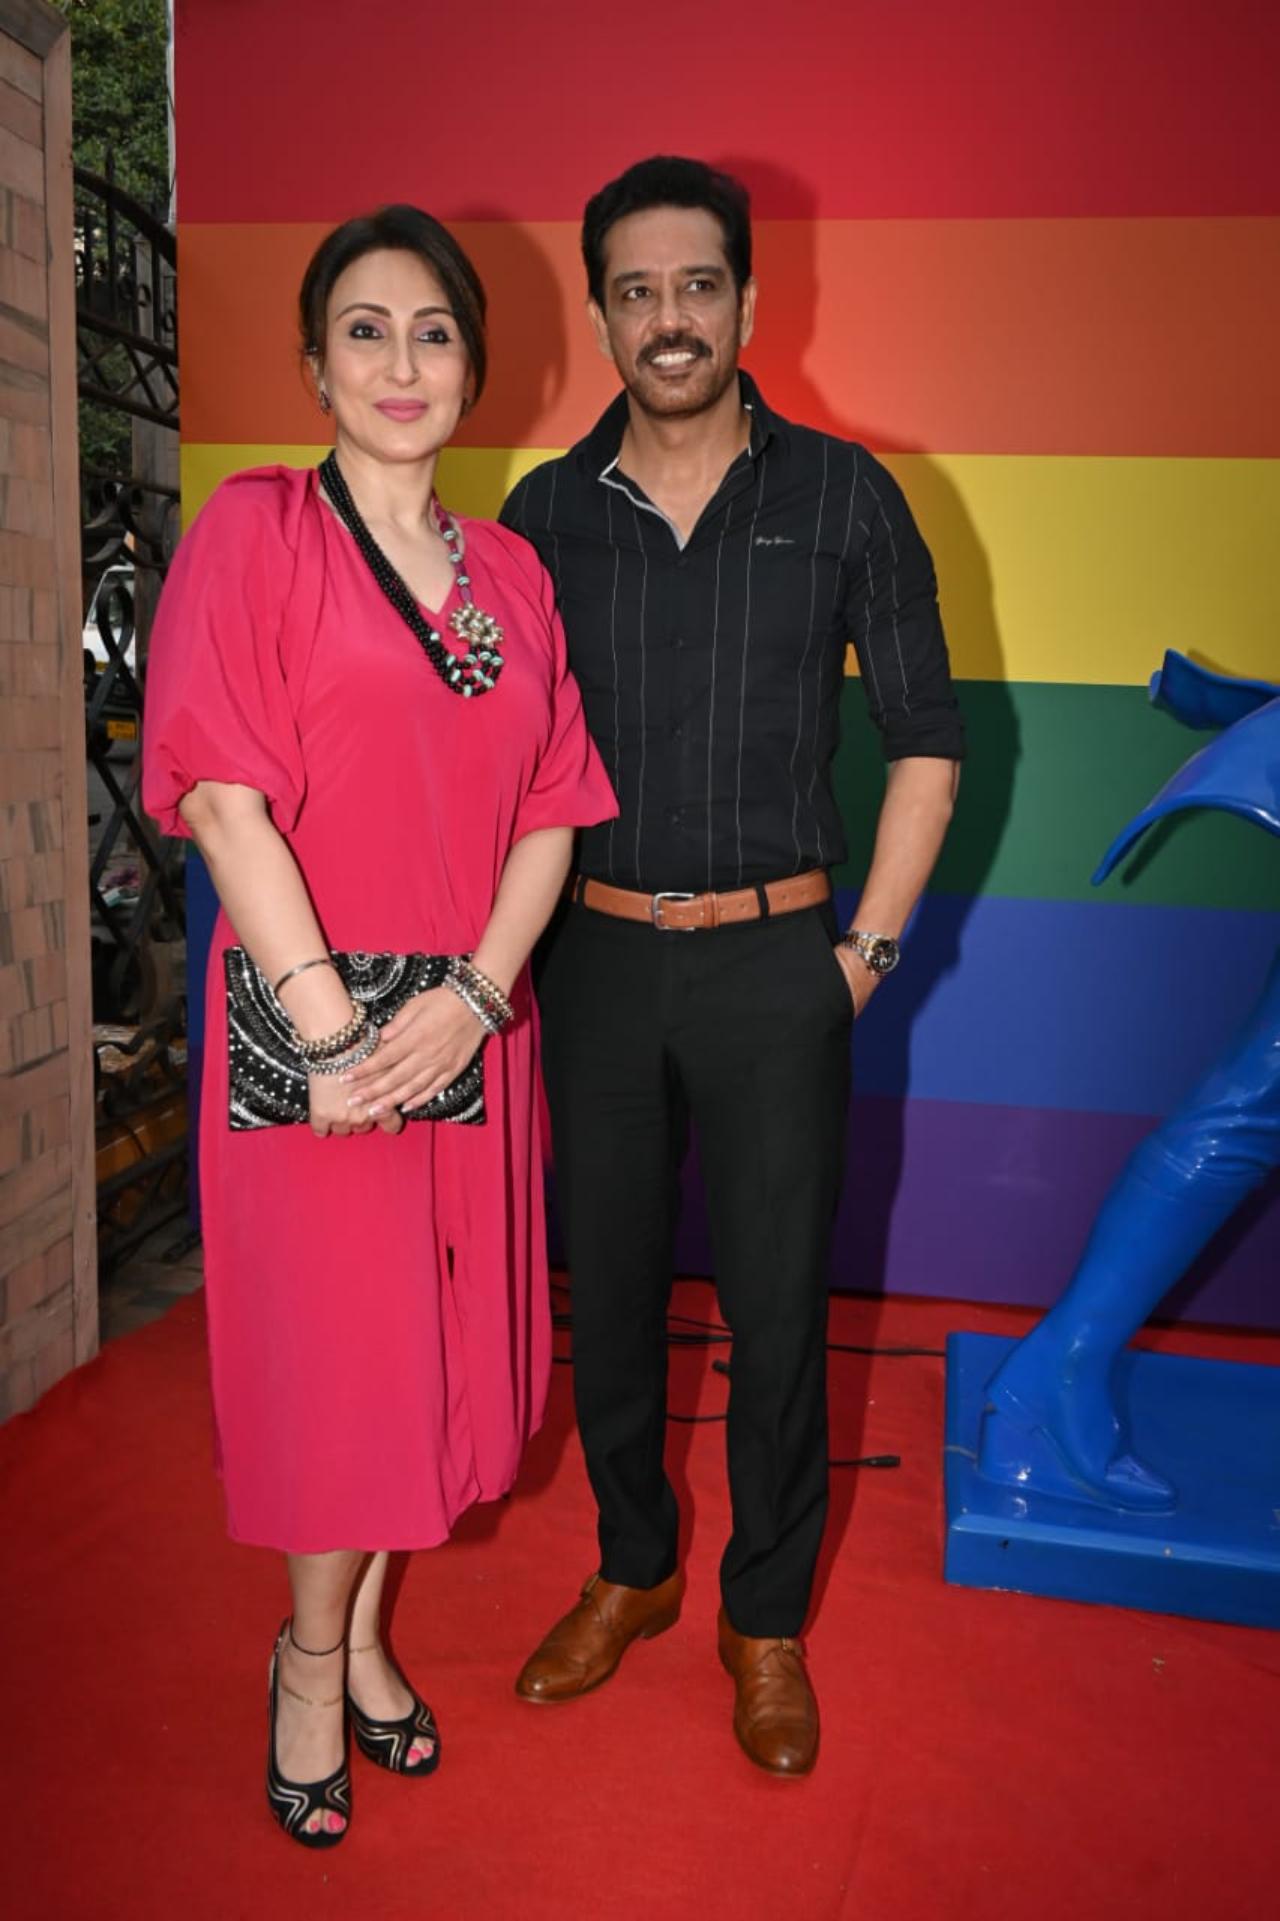 Actor Anup Soni was present at the opening night along with his wife Juhi Babbar. Actor Anup Soni said, 